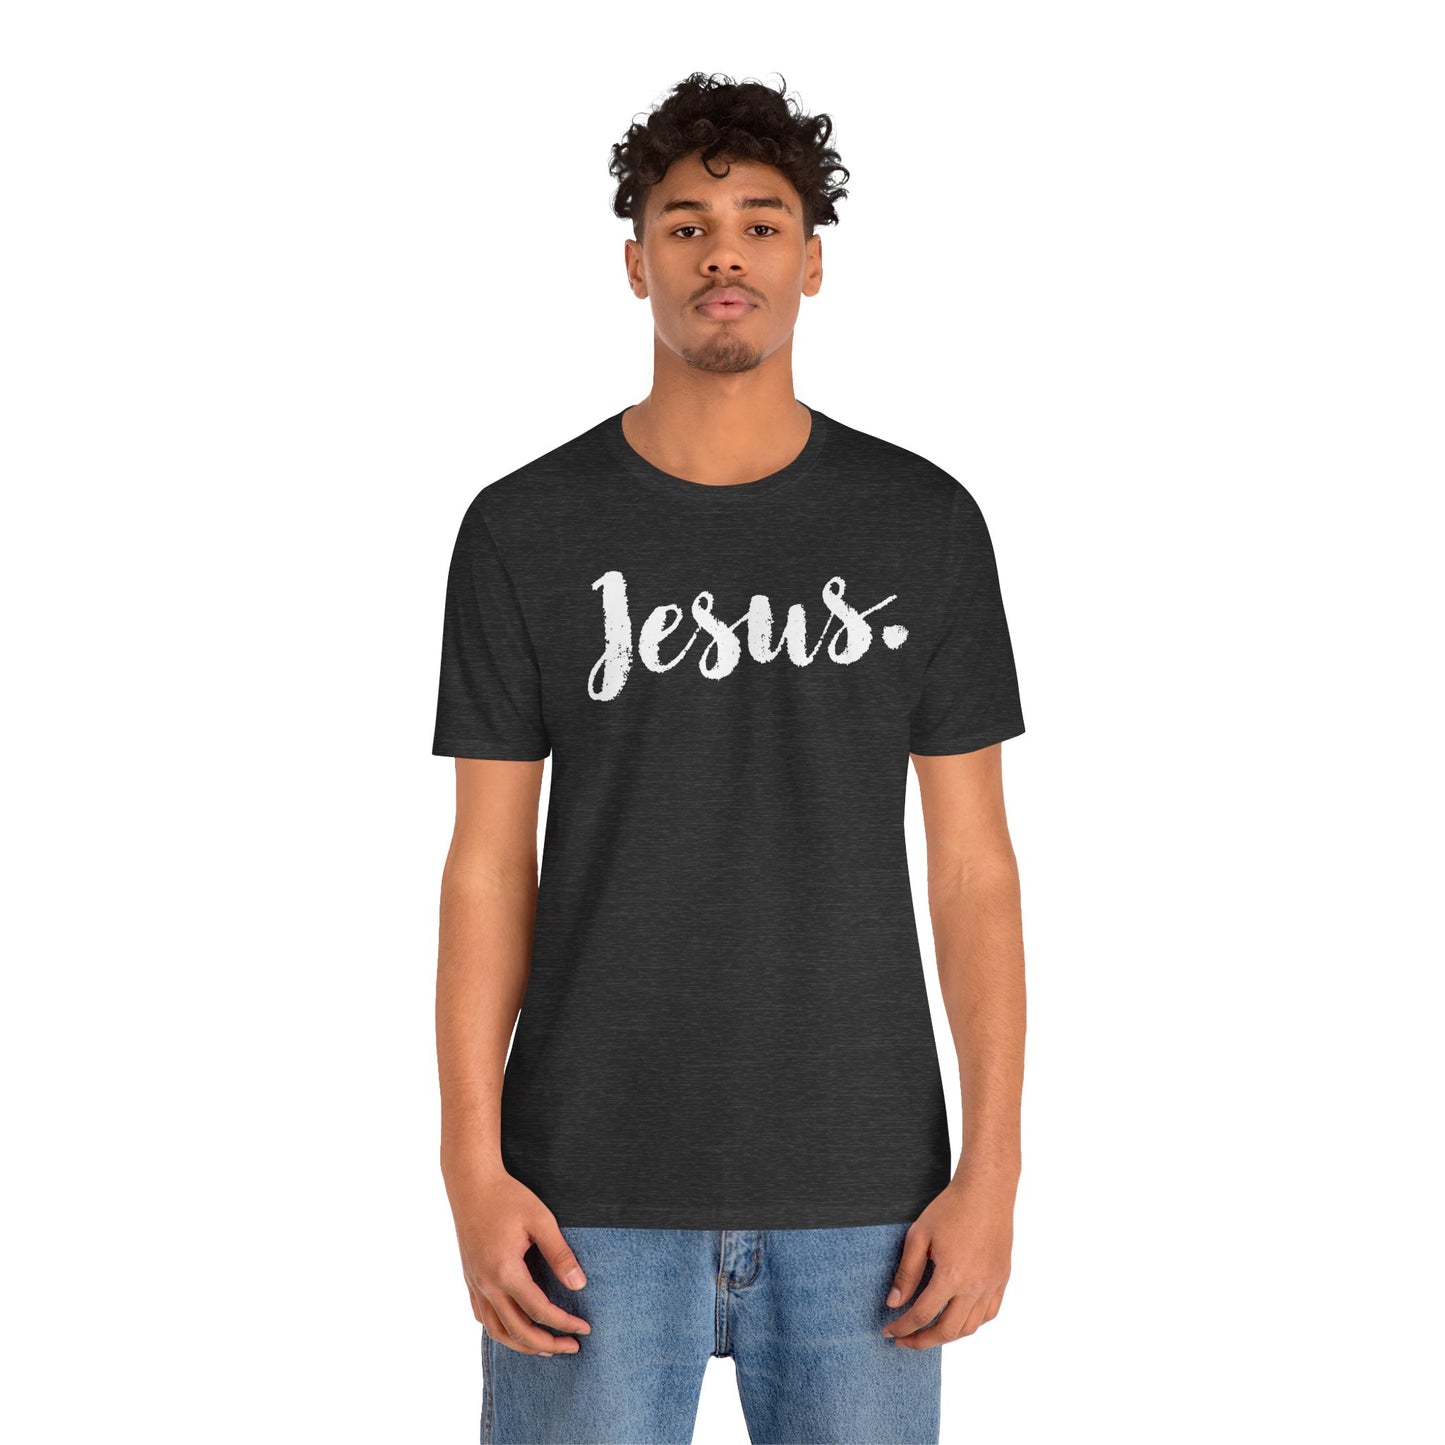 JESUS. There is POWER in the NAME of Jesus. Wearing & Sharing The Word. Christian. Faith. Hope. Believe. Shirts. Gifts.